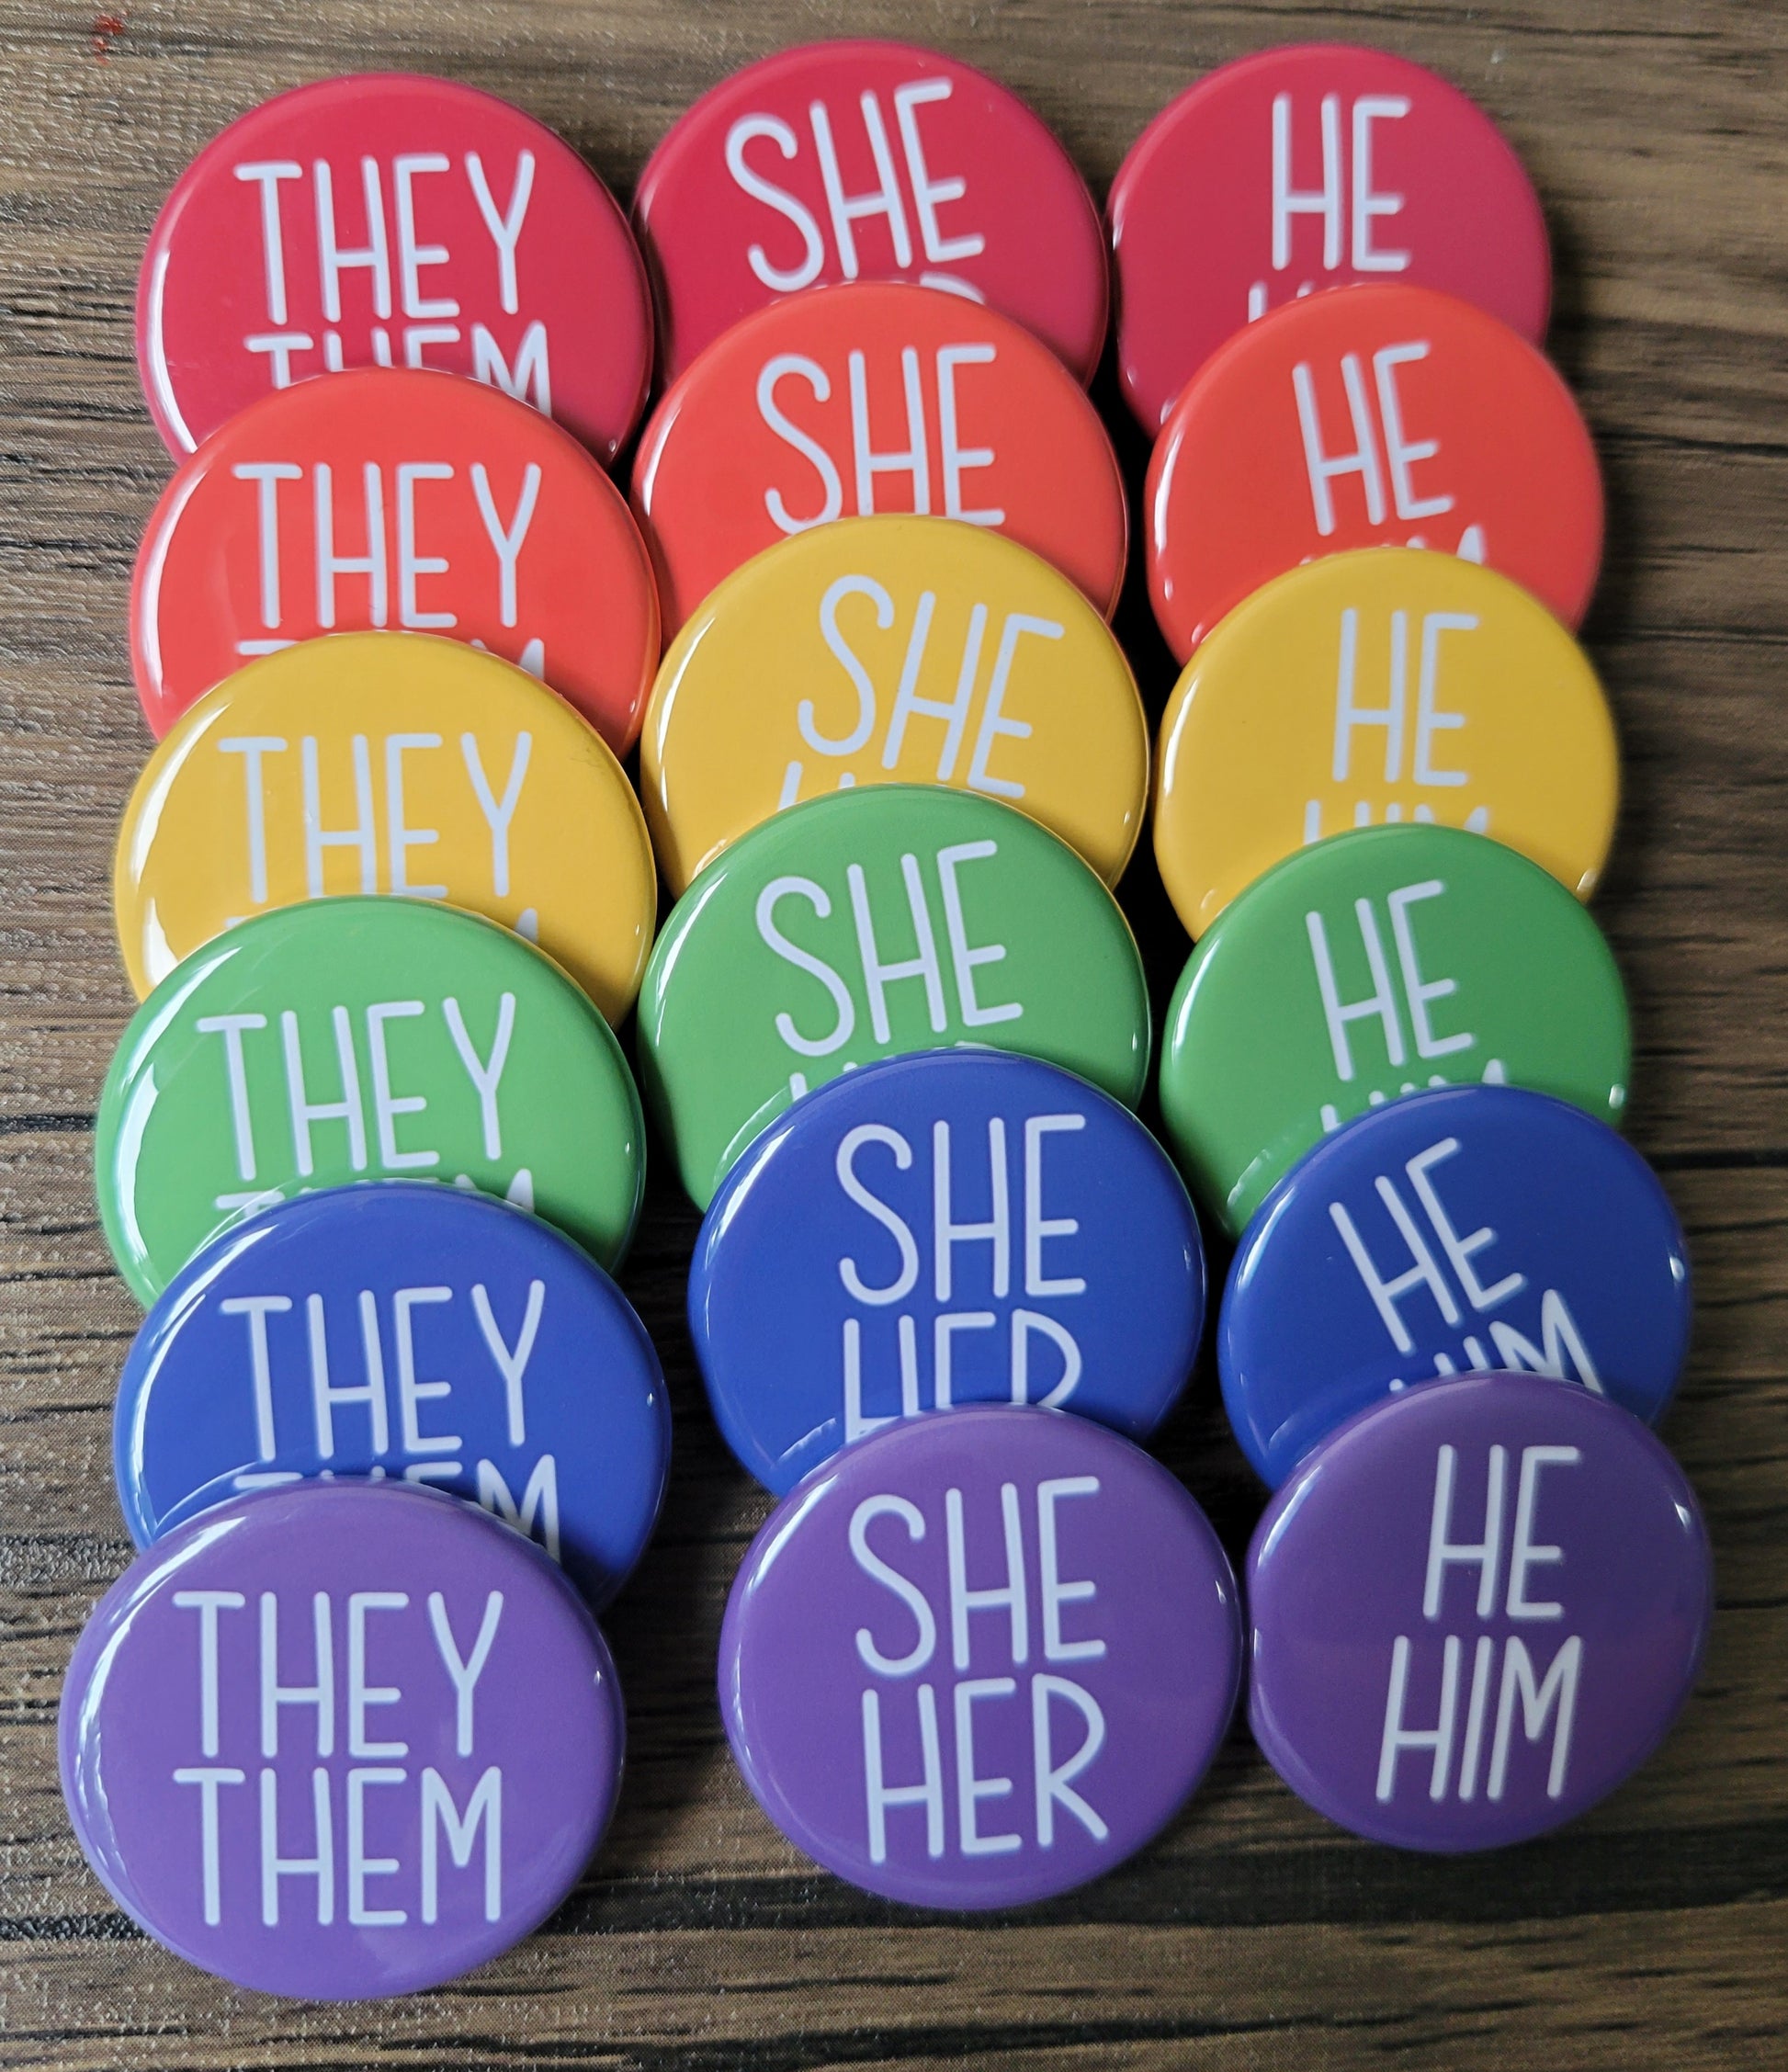 Pronoun Earrings / they/them/he/his/she/hers/Mx